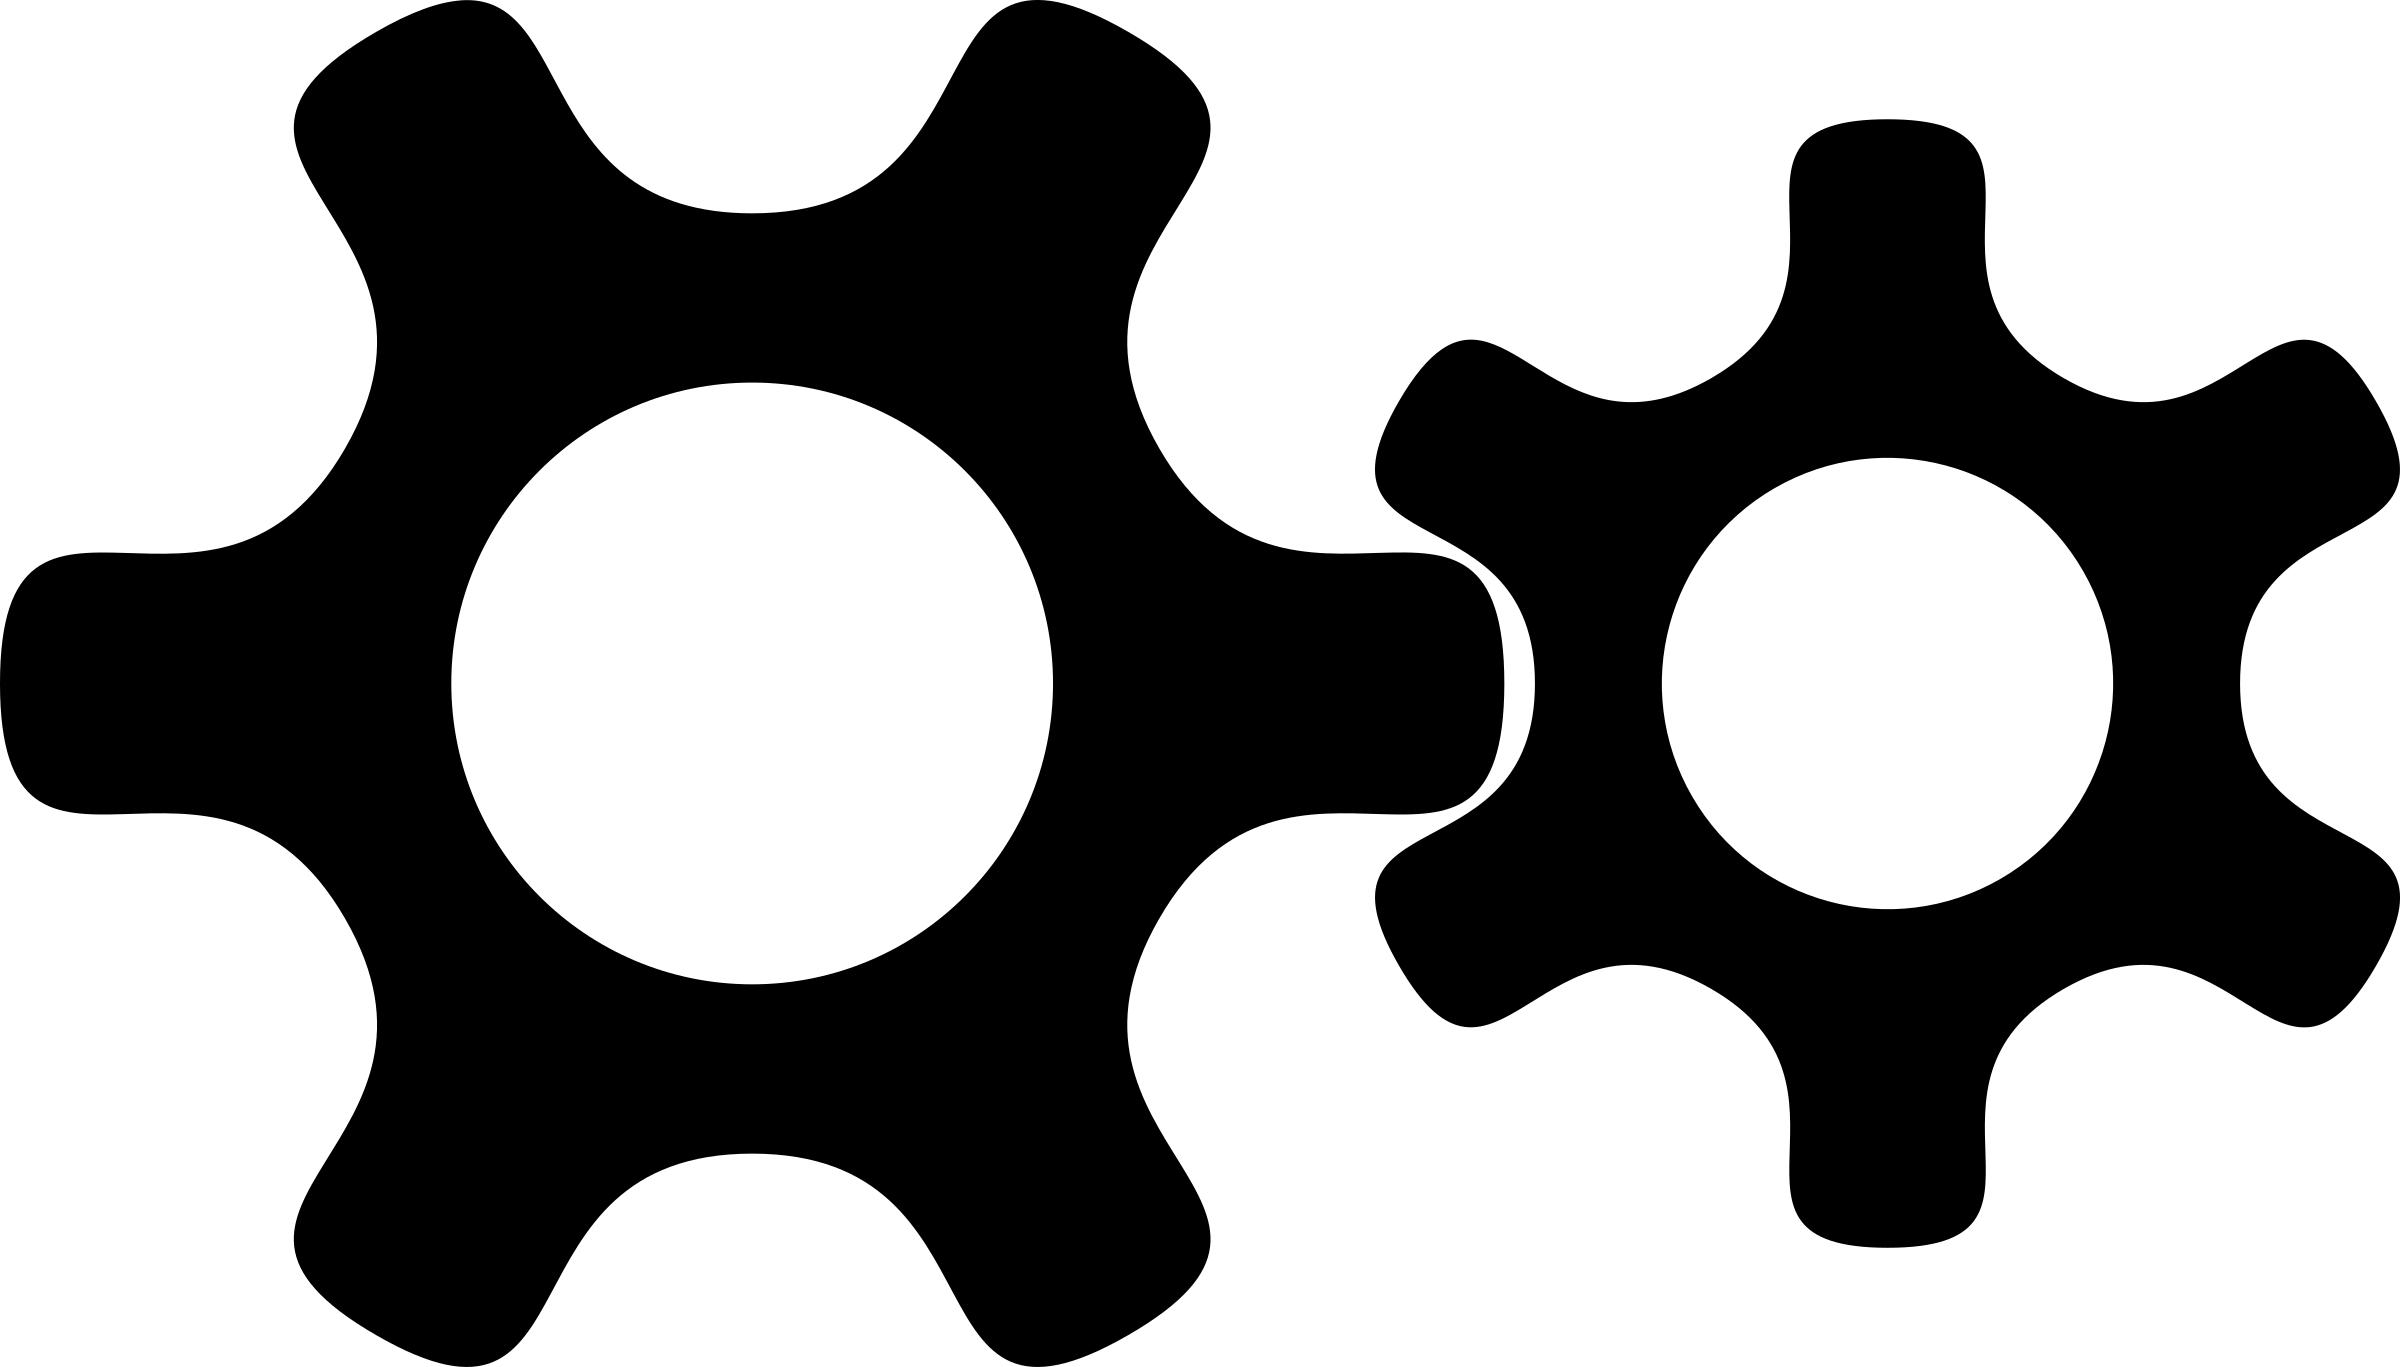 Meshed Gears PNG icons